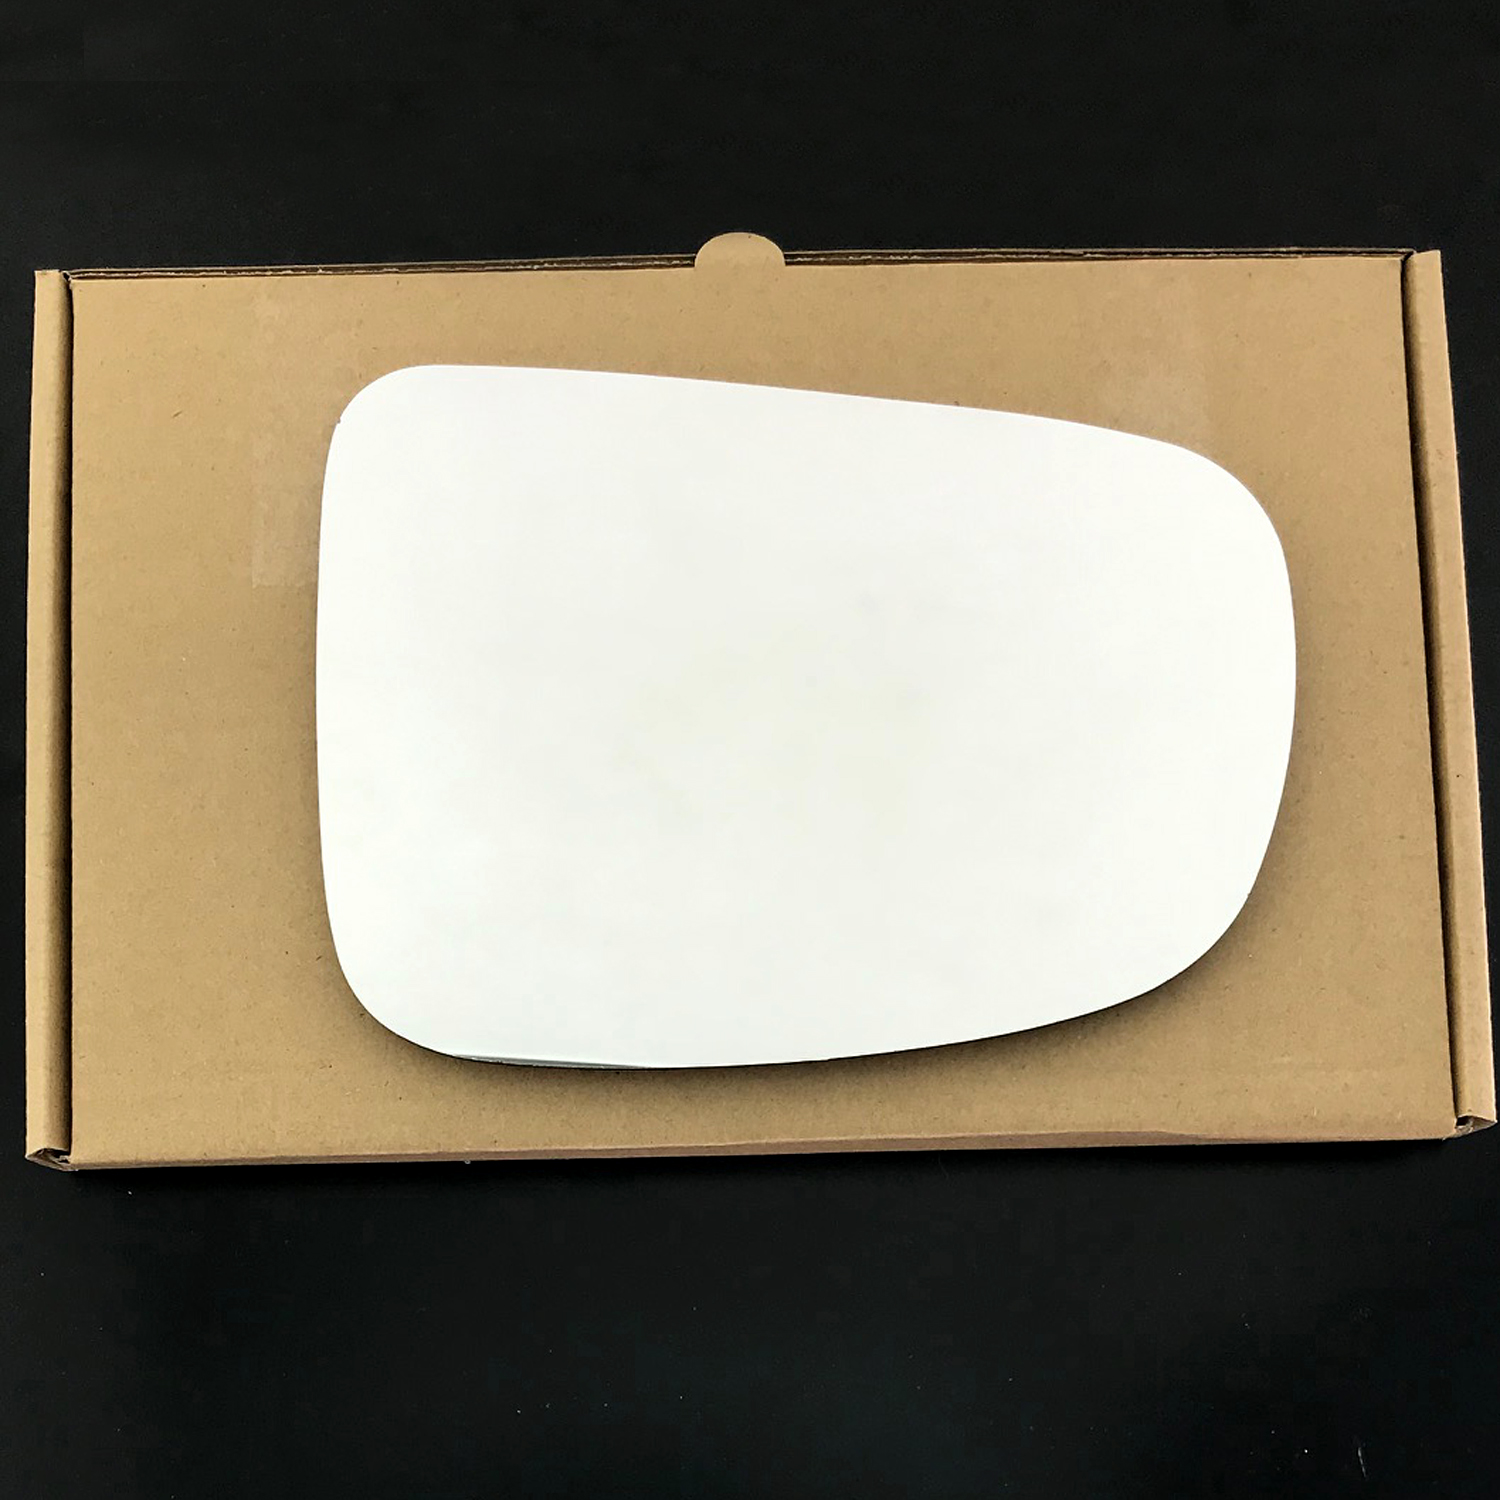 Ford Transit VAN Wing Mirror Glass RIGHT HAND ( UK Driver Side ) 1994 to 2000 – Convex Wing Mirror ( Electric mirror )